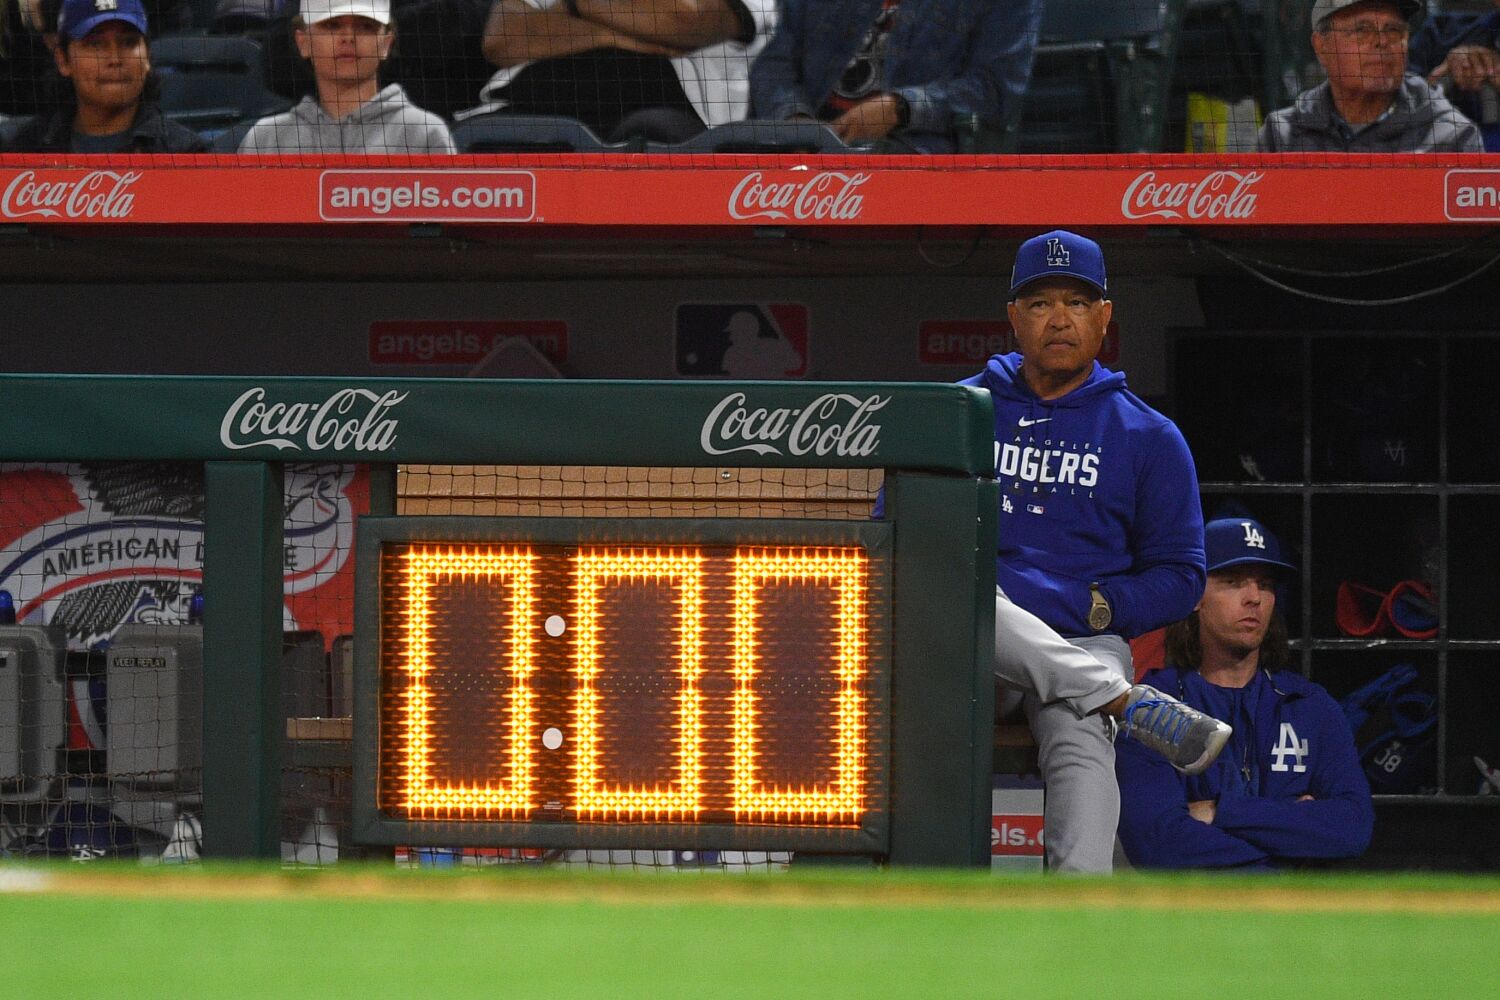 'We've just got to figure it out.' Dodgers, Angels brace for pitch clock implications